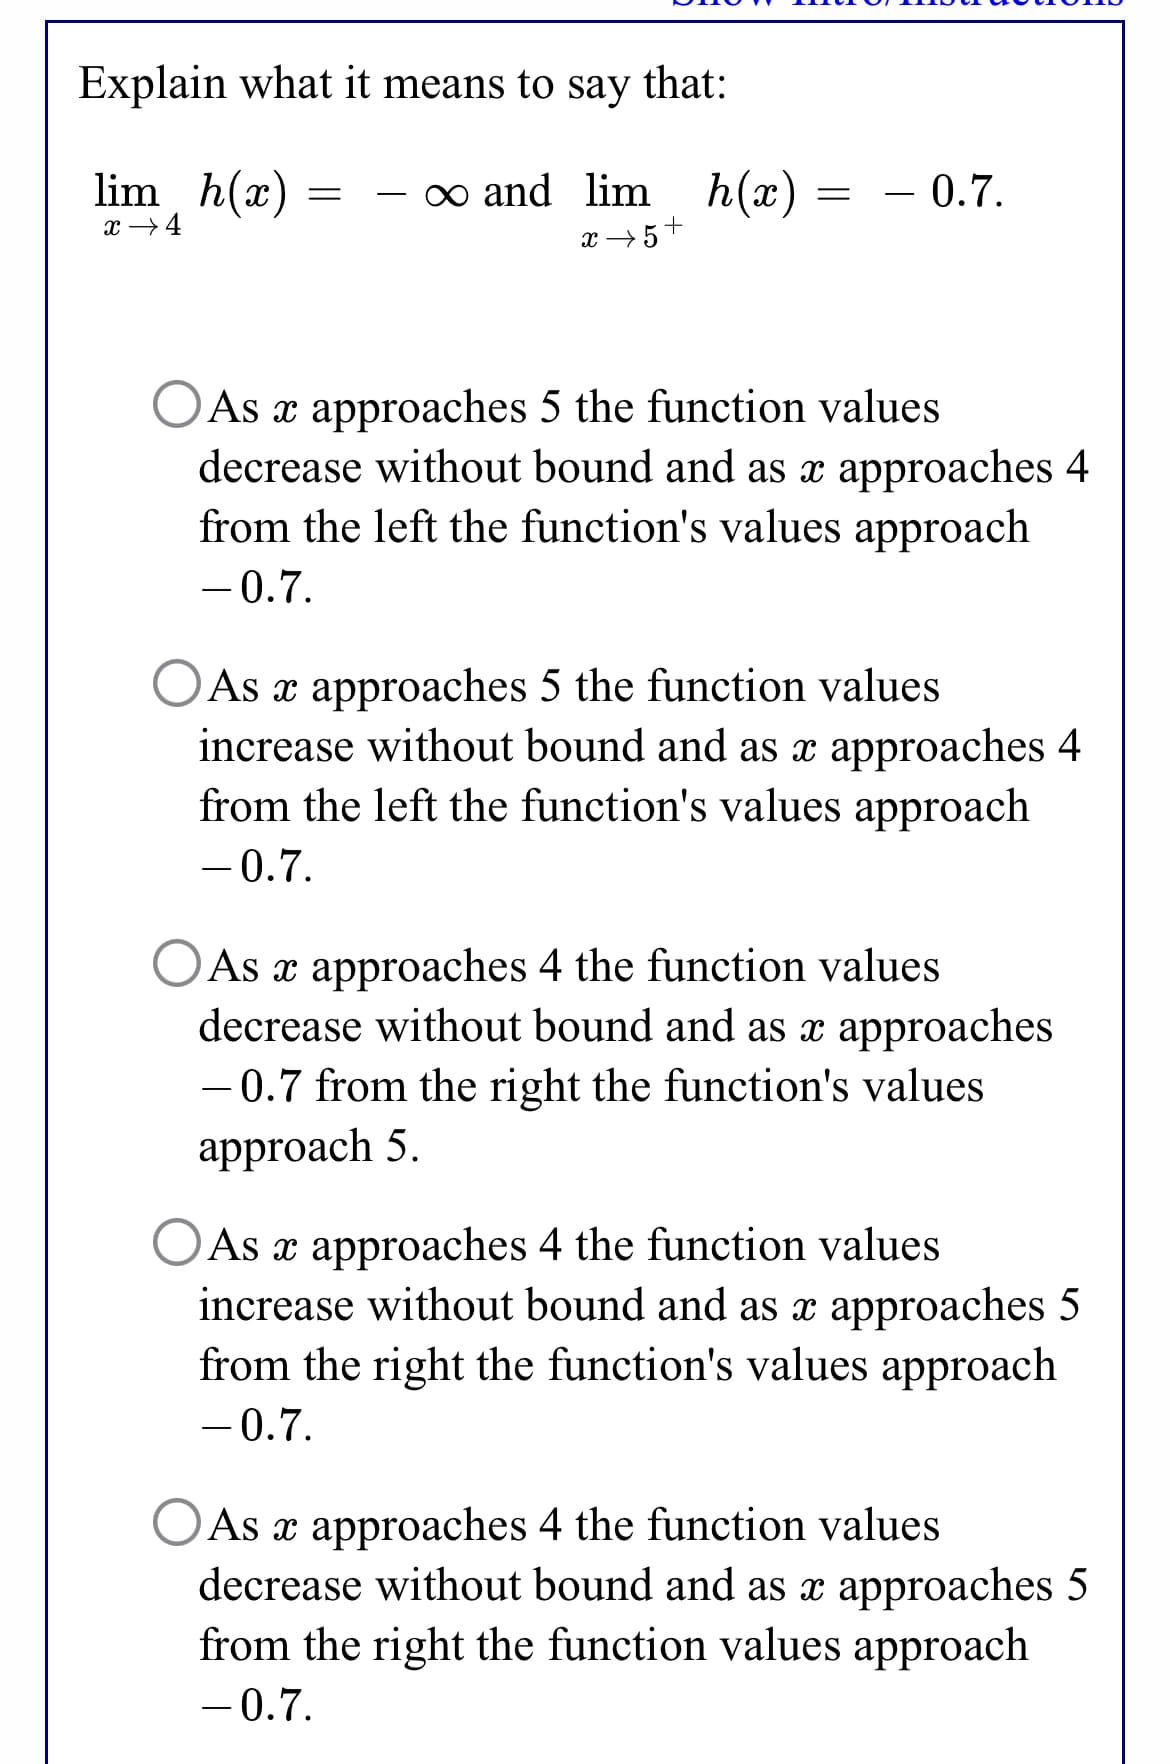 Explain what it means to say that:
lim, h(x)
∞ and lim h(x)
= – 0.7.
x →4
x → 5+
O As x approaches 5 the function values
decrease without bound and as x approaches 4
from the left the function's values approach
-0.7.
As x approaches 5 the function values
increase without bound and as x approaches 4
from the left the function's values approach
- 0.7.
As x approaches 4 the function values
decrease without bound and as x approaches
- 0.7 from the right the function's values
approach 5.
As x approaches 4 the function values
increase without bound and as x approaches 5
from the right the function's values approach
-0.7.
As x approaches 4 the function values
decrease without bound and as x approaches 5
from the right the function values approach
-0.7.
